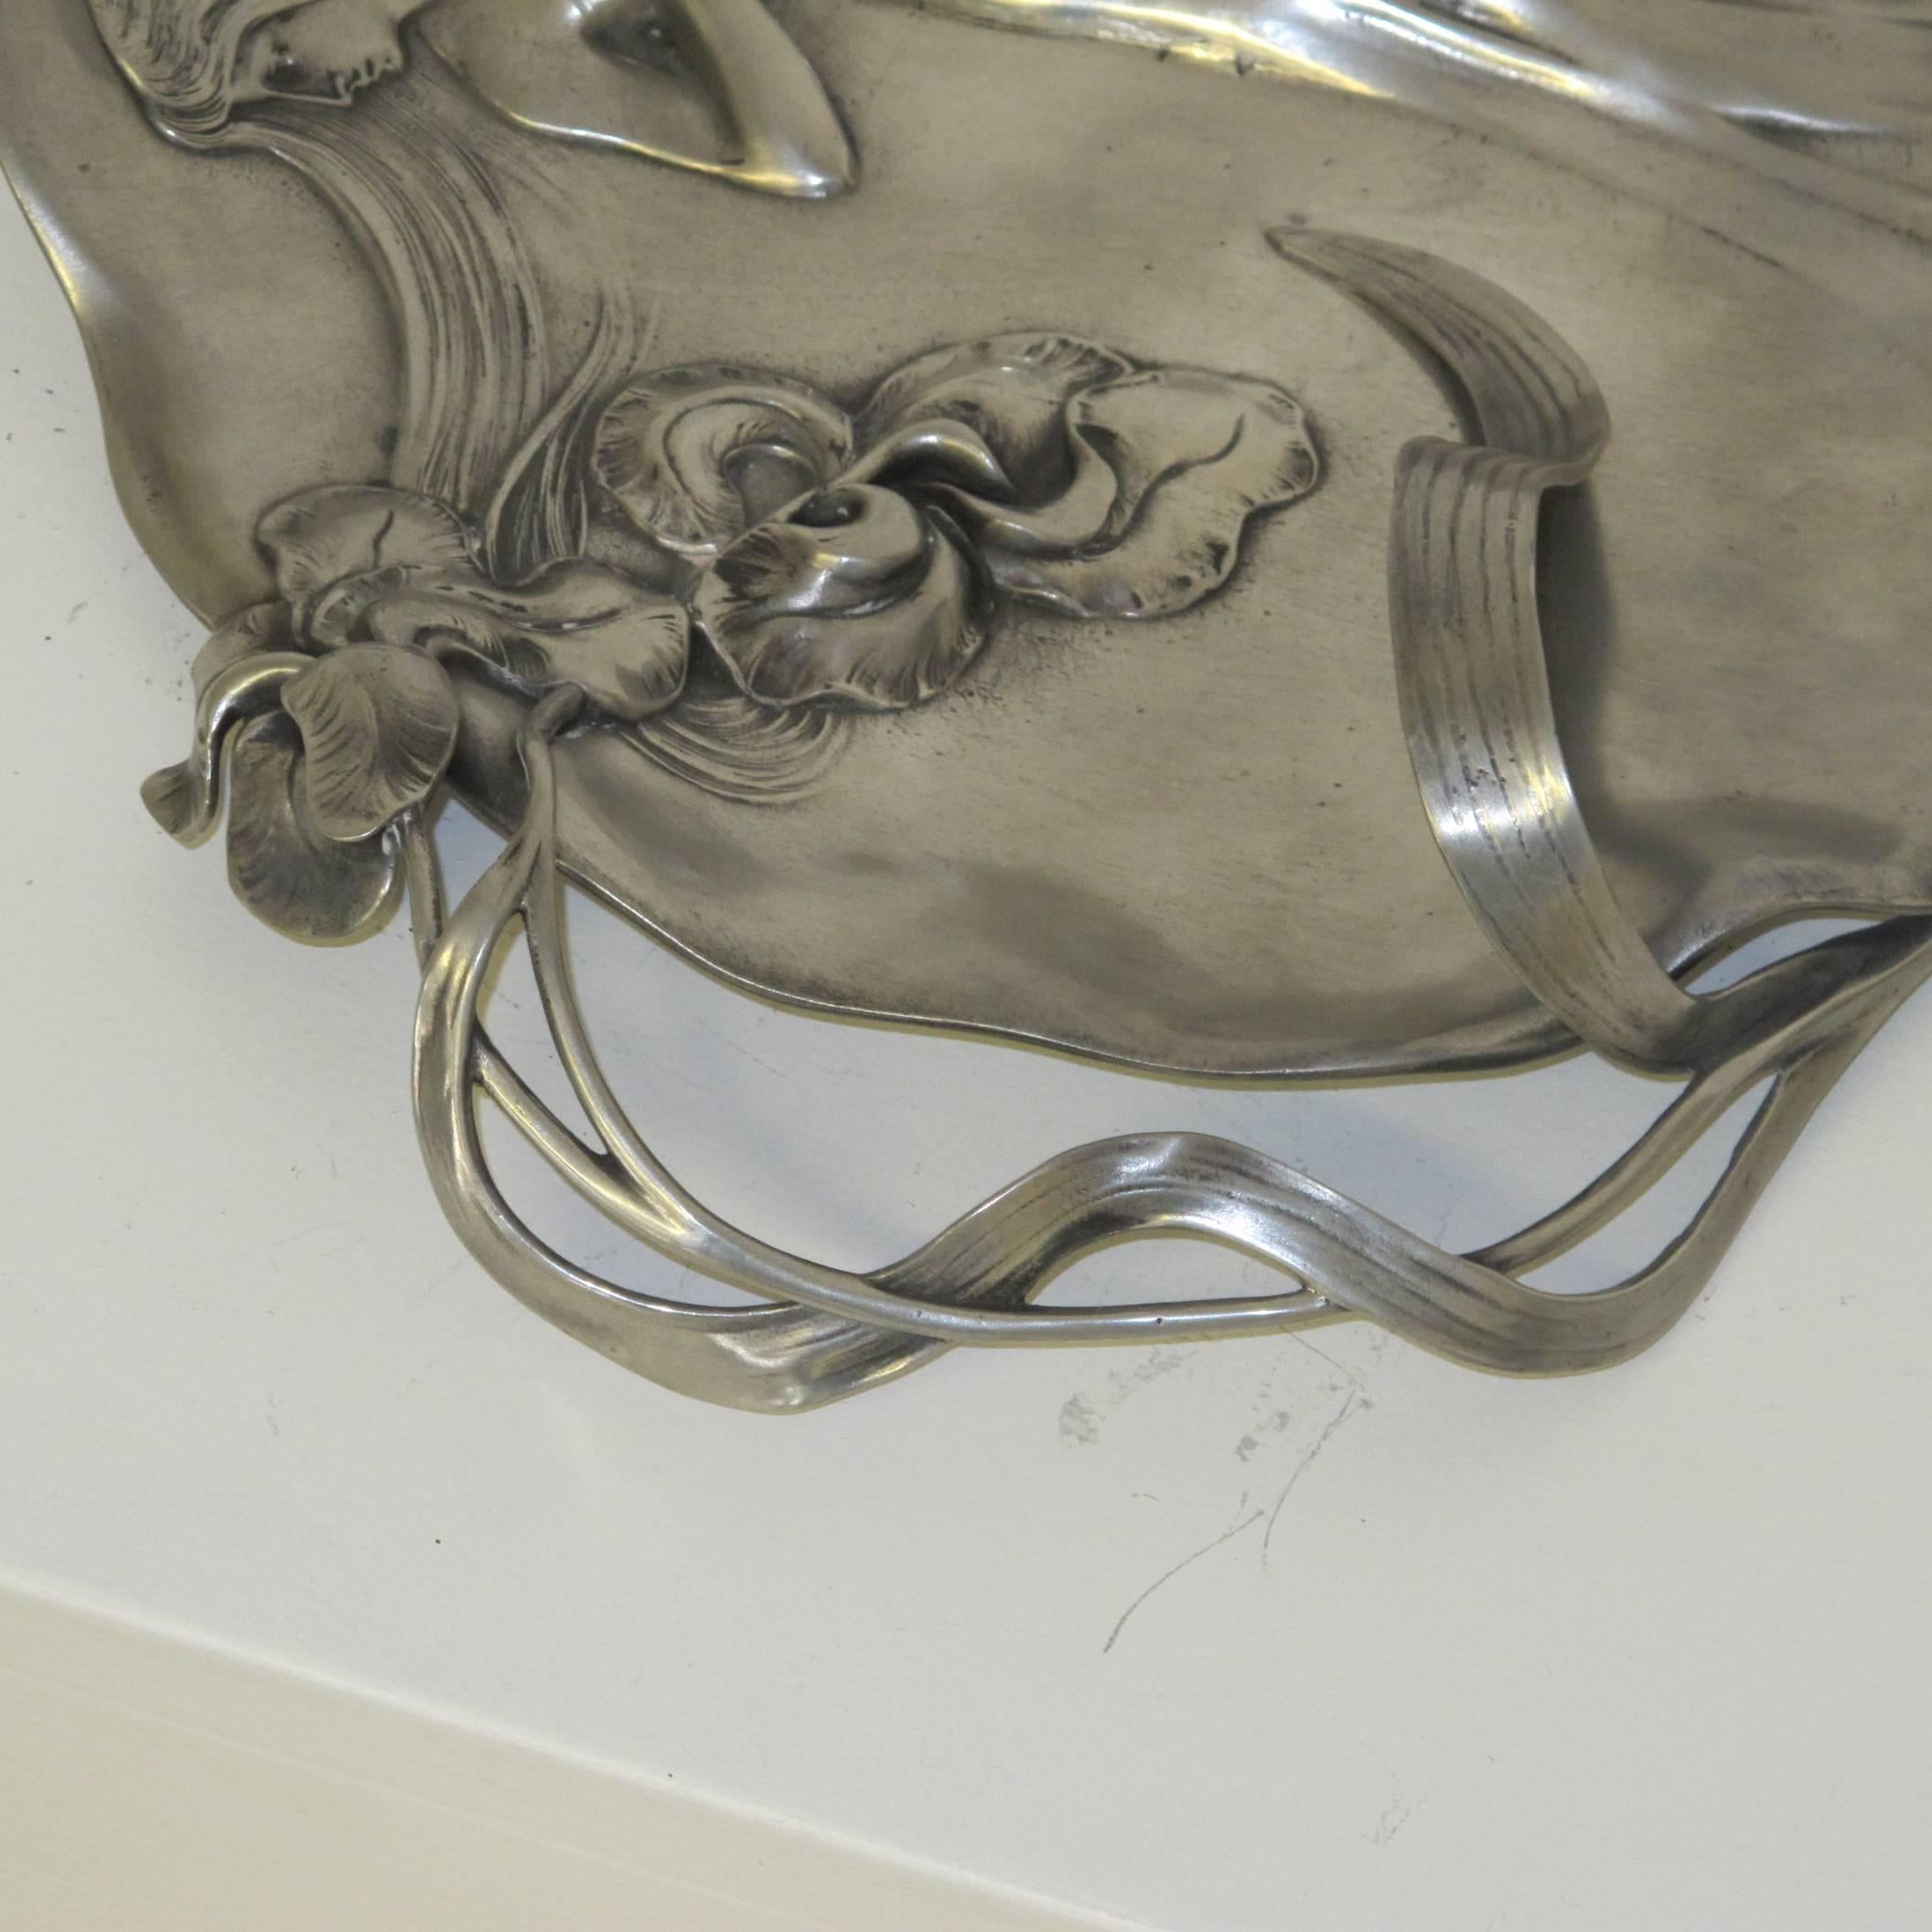 Beautiful Italian Art Nouveau pewter dish with female figure and iris, its leaves  coming out of the plate.
Stamped with the marks of Achille Gamba, see picture.

